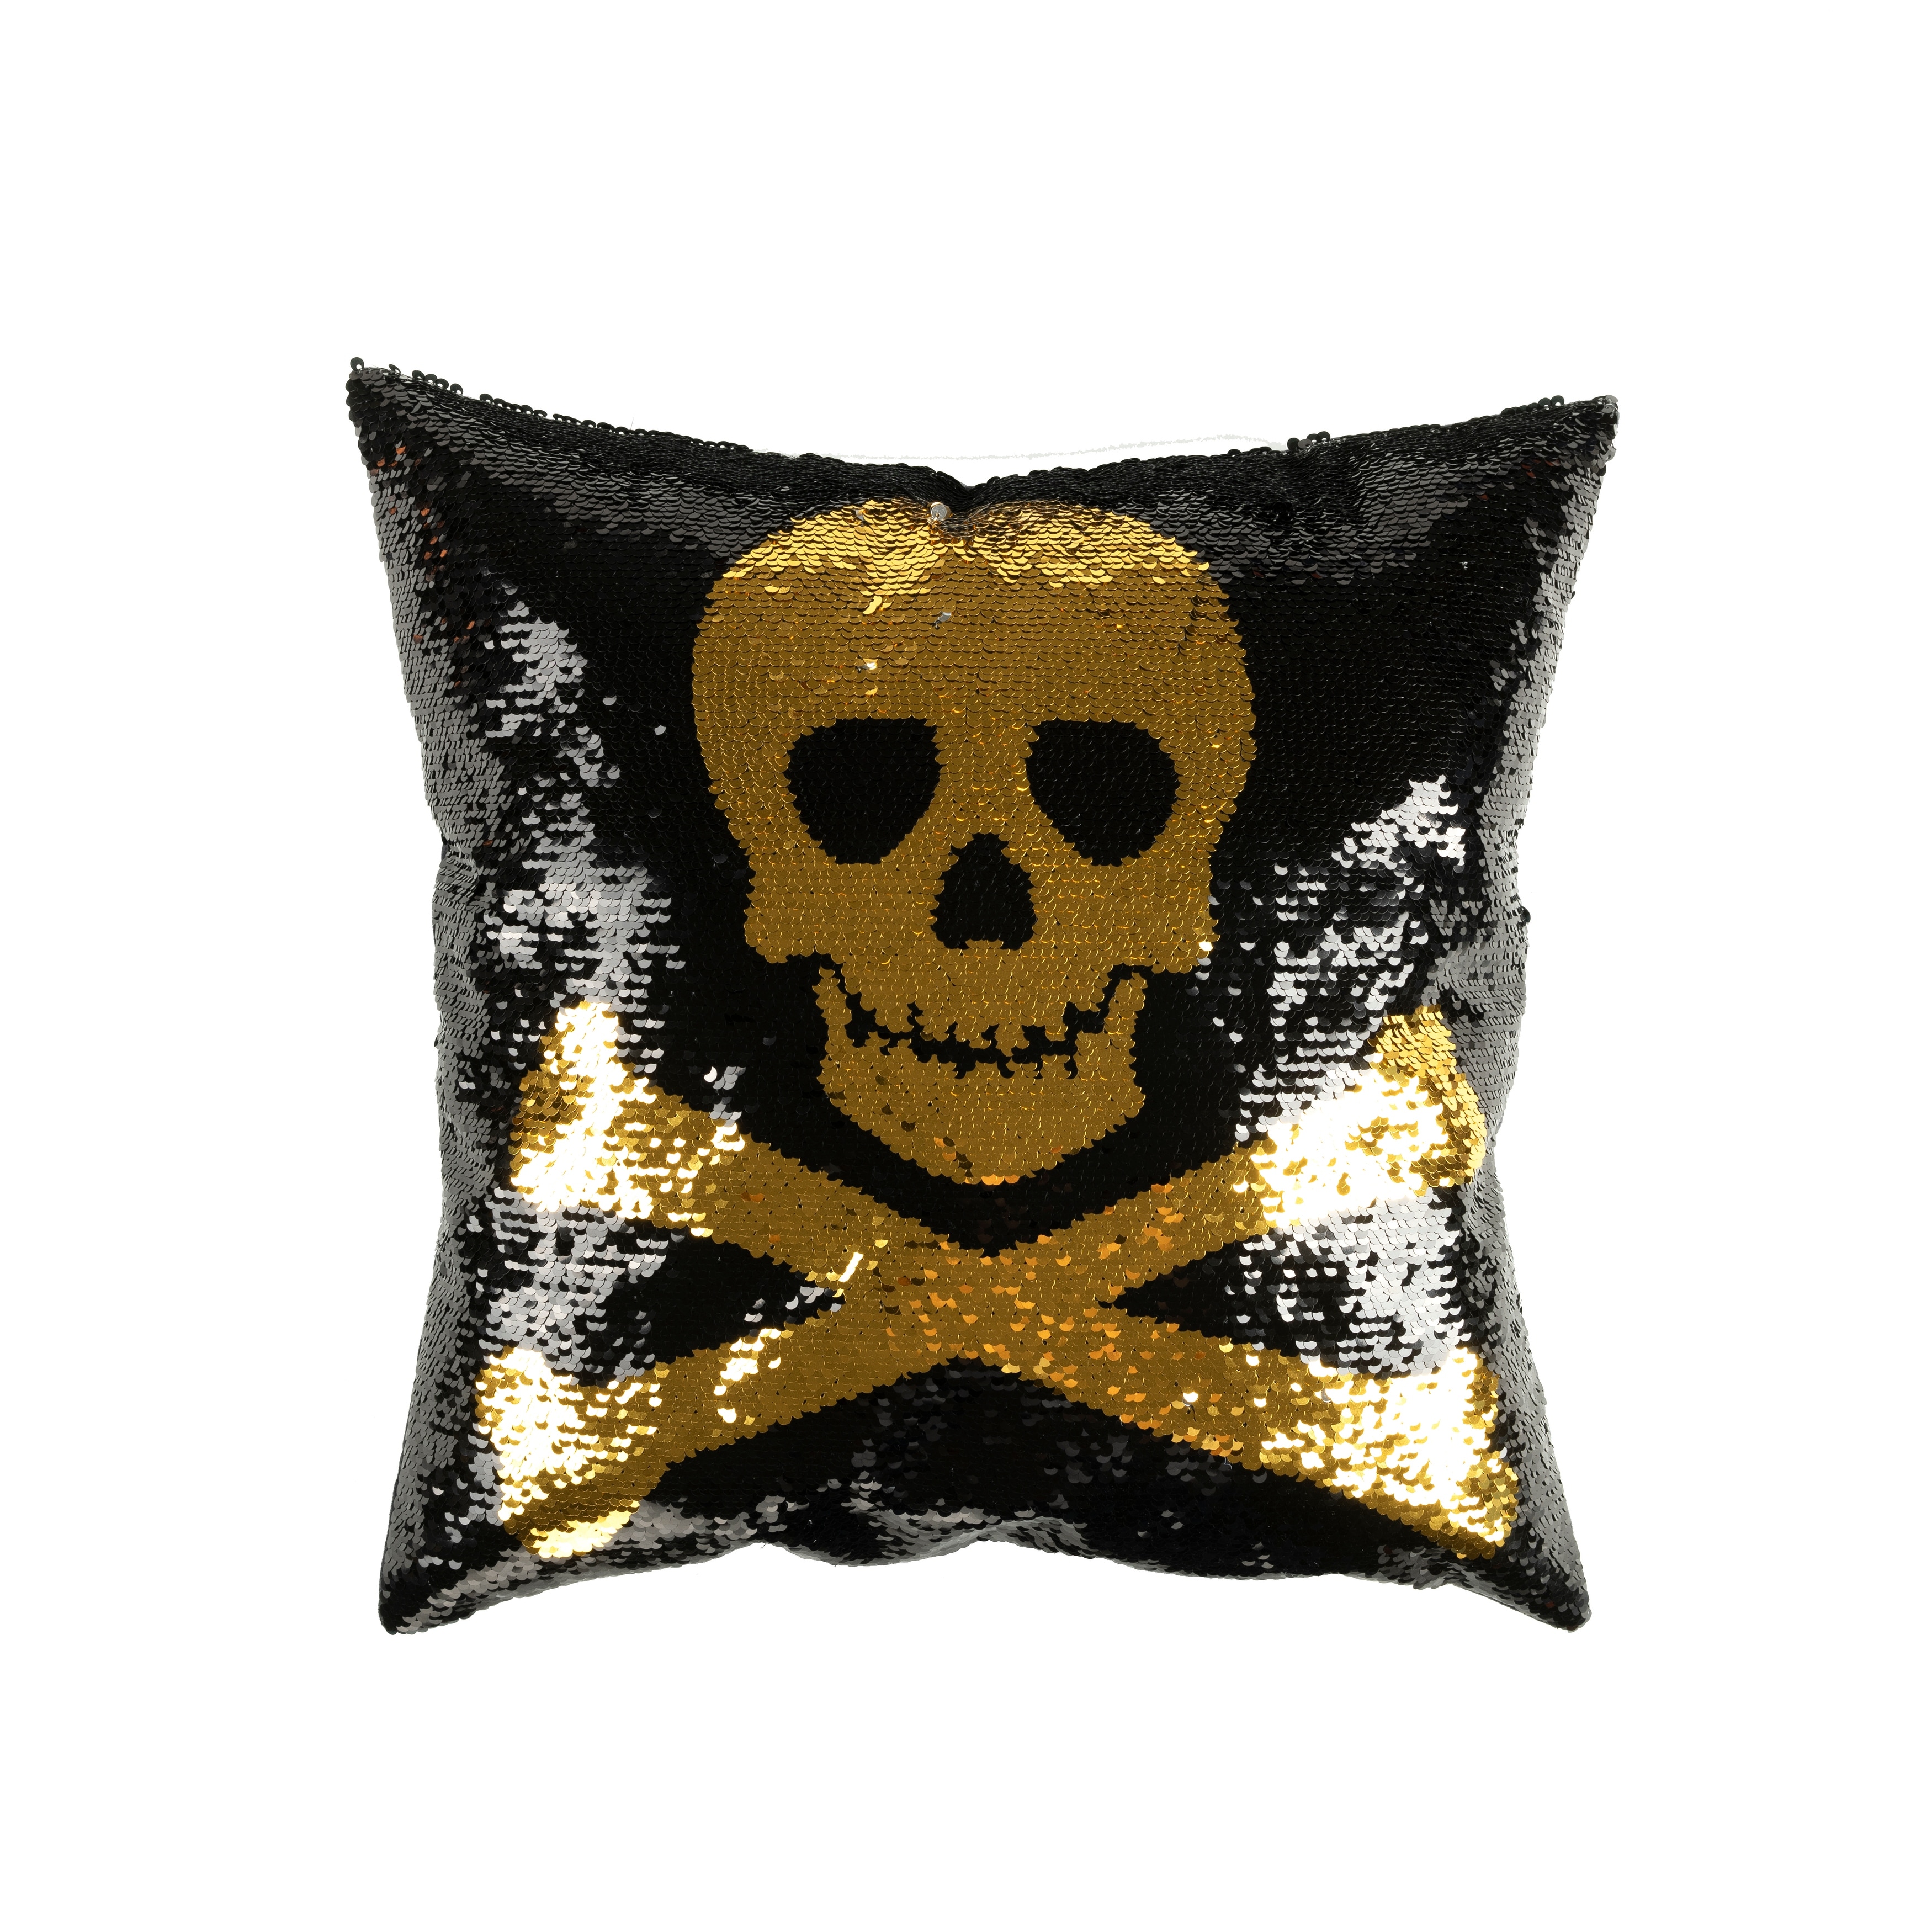 https://ak1.ostkcdn.com/images/products/is/images/direct/dcafcde022f1250cfb17d132c864629fcb8c0aa5/Lush-Decor-Skull-And-Crossbones-Decorative-Pillow-Single.jpg